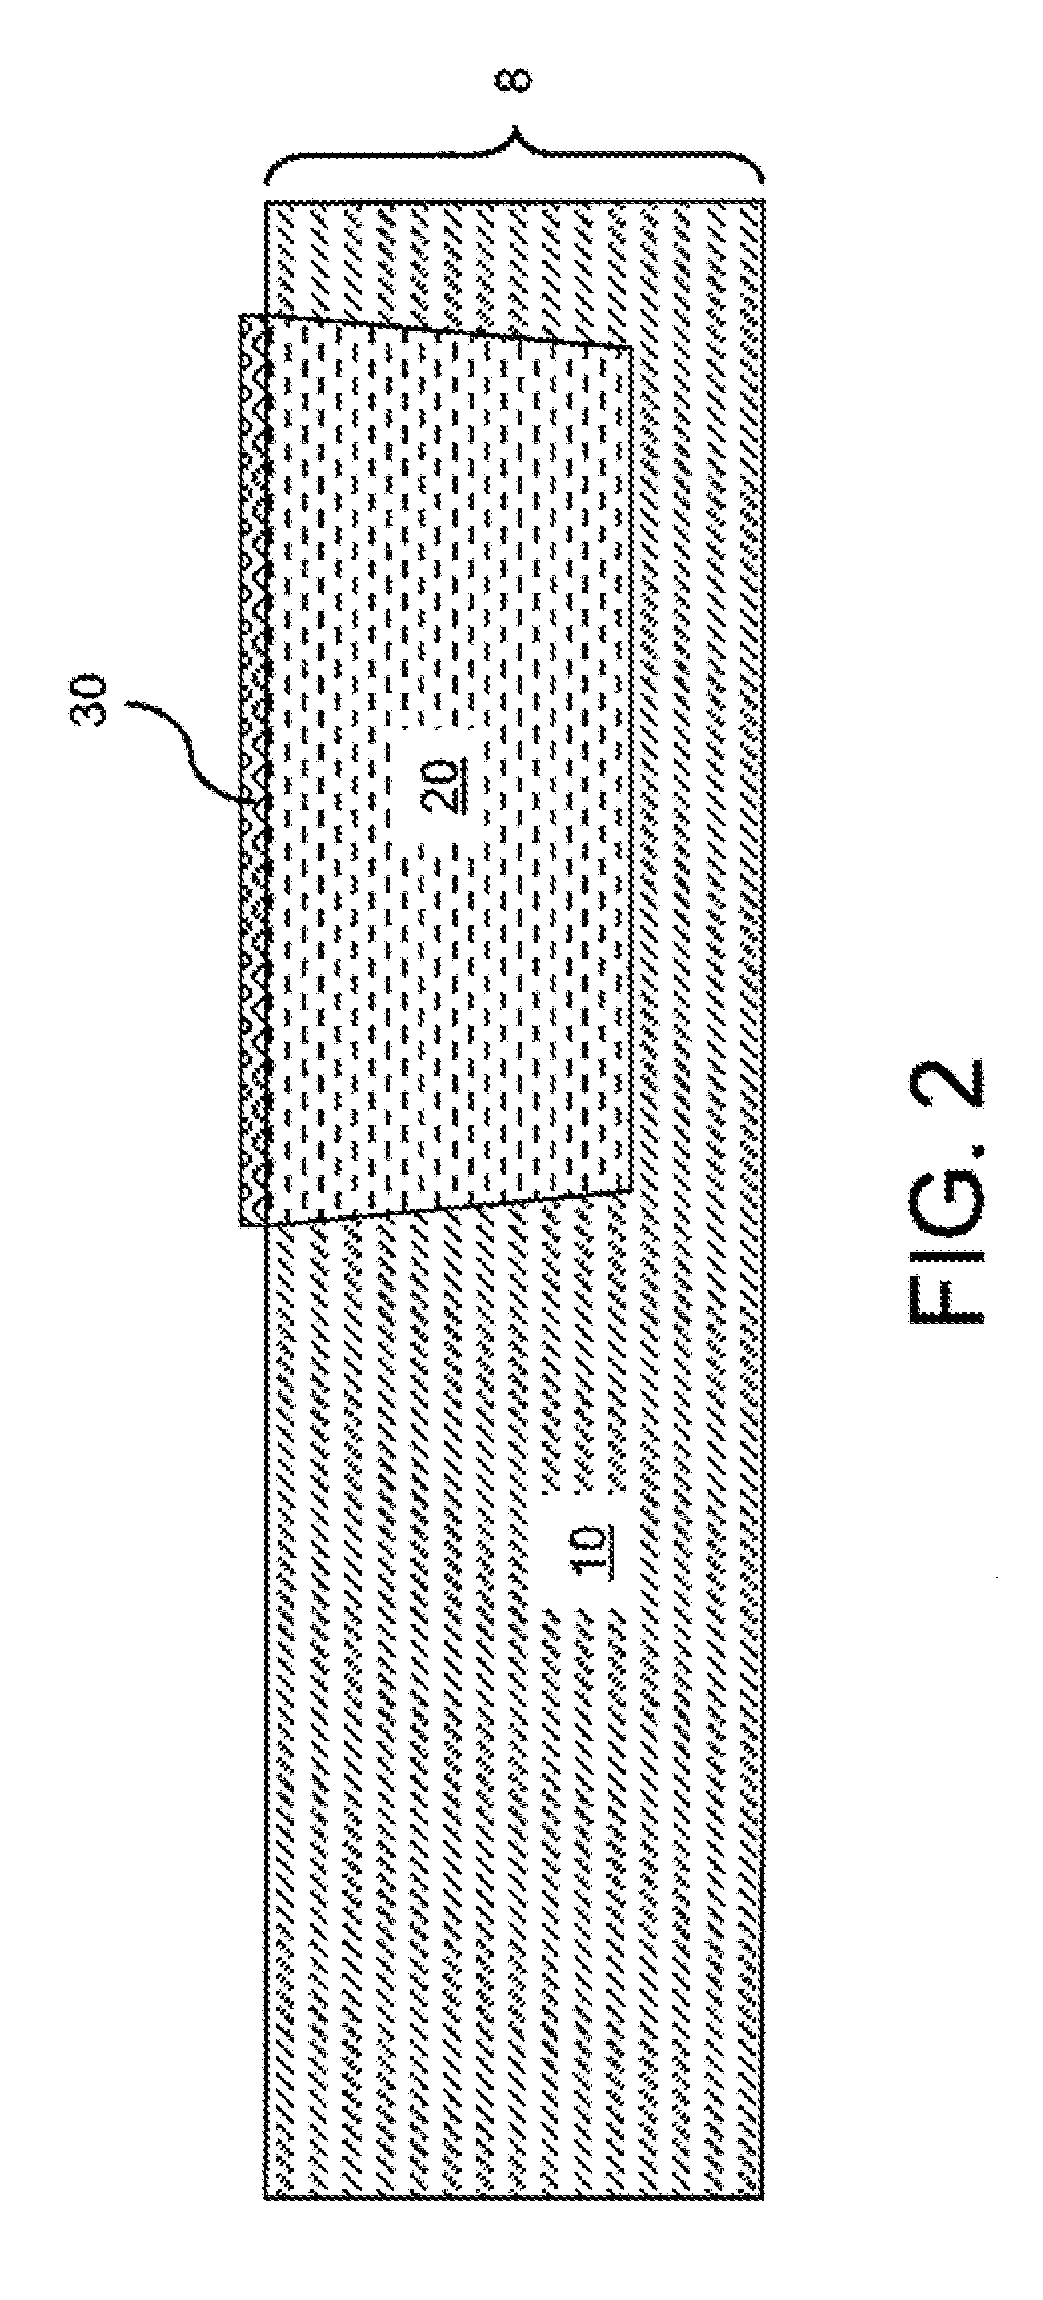 Selectively self-assembling oxygen diffusion barrier